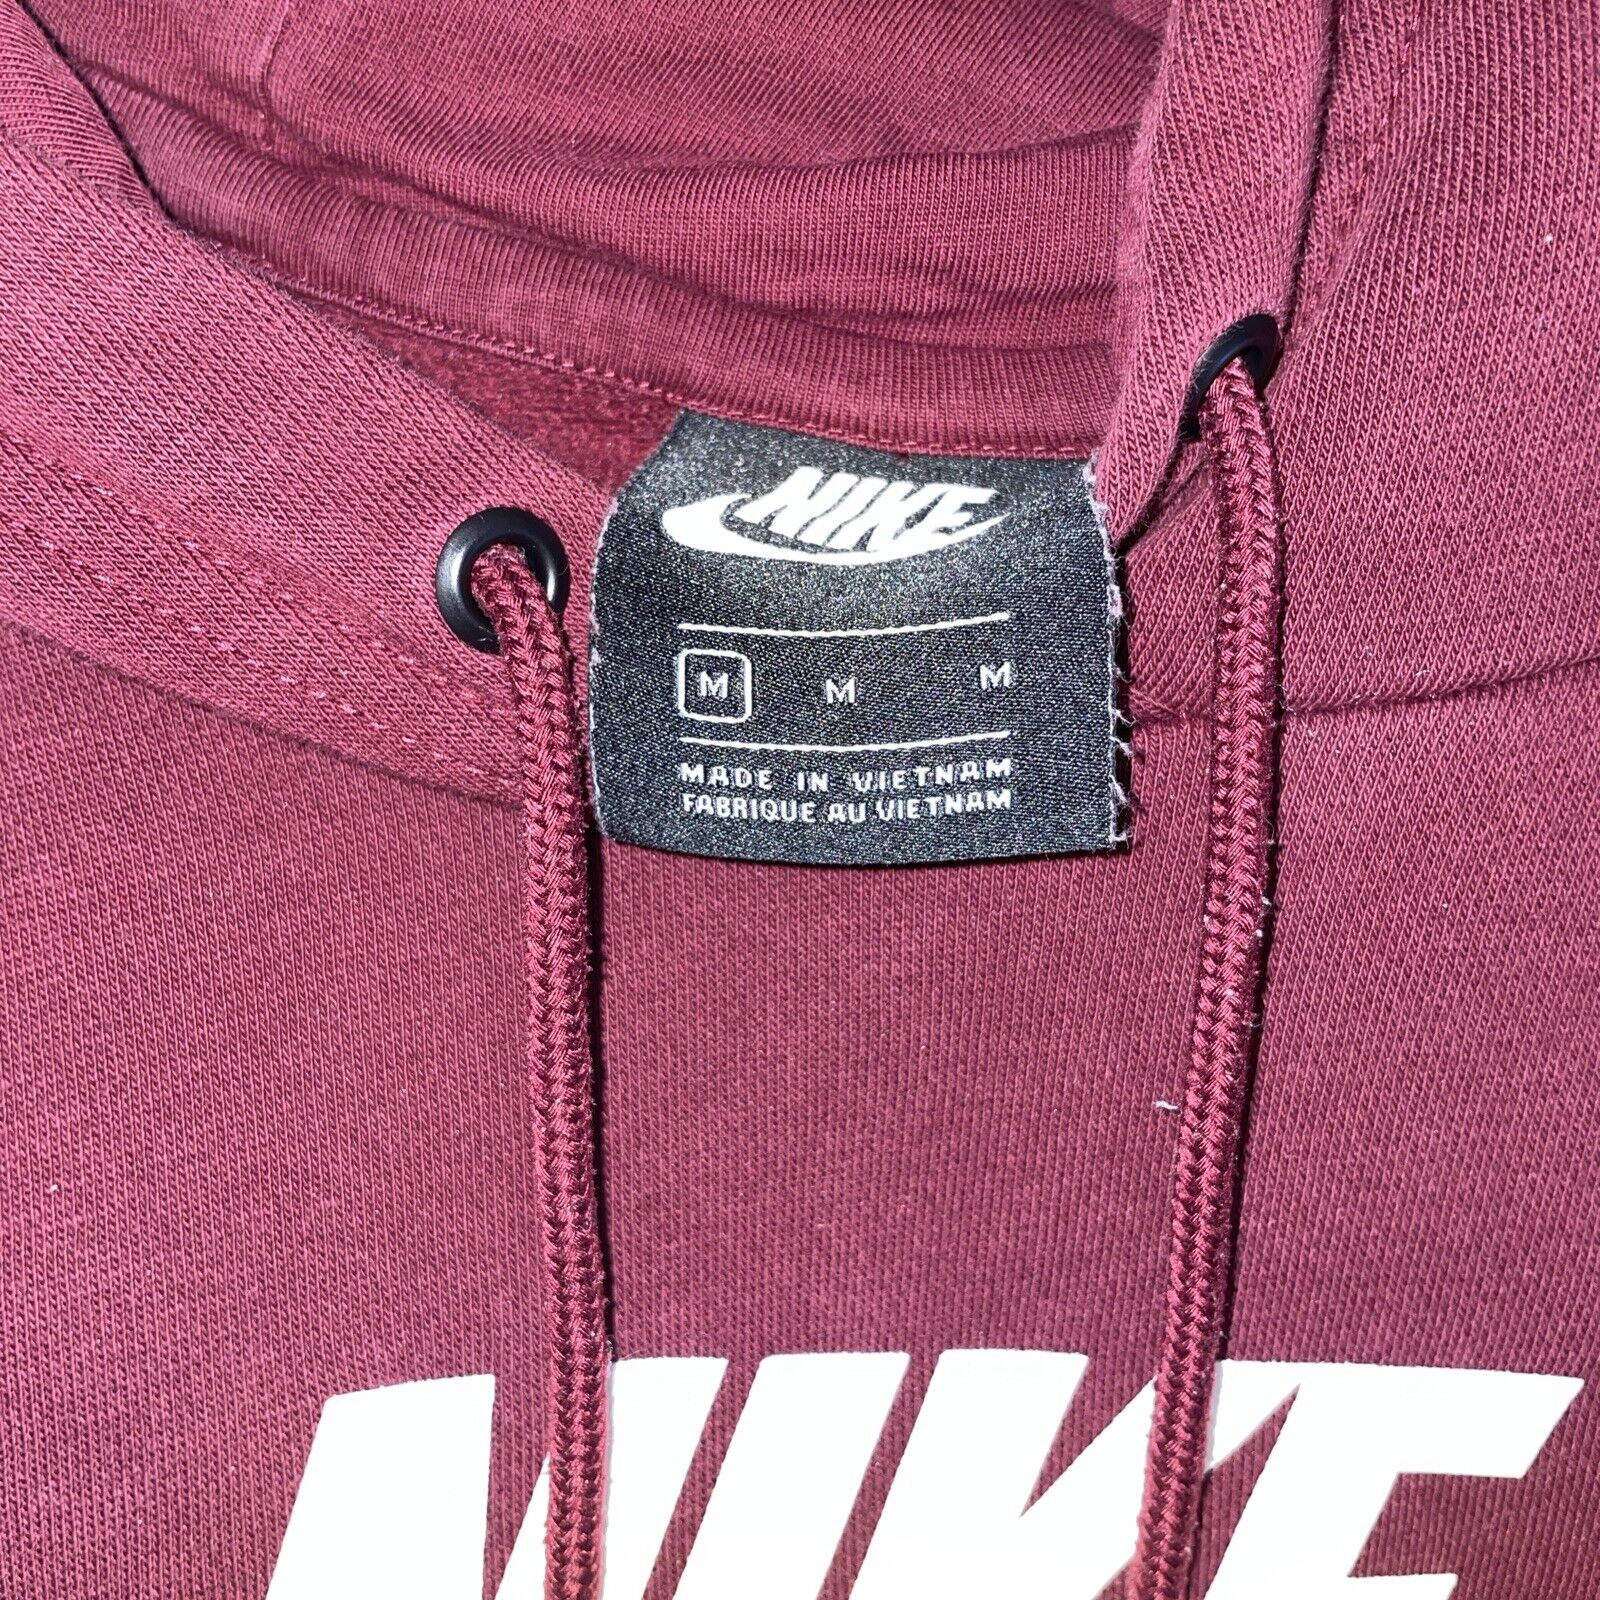 Women’s Nike Teal Crewneck Pullover S And Burgund… - image 6